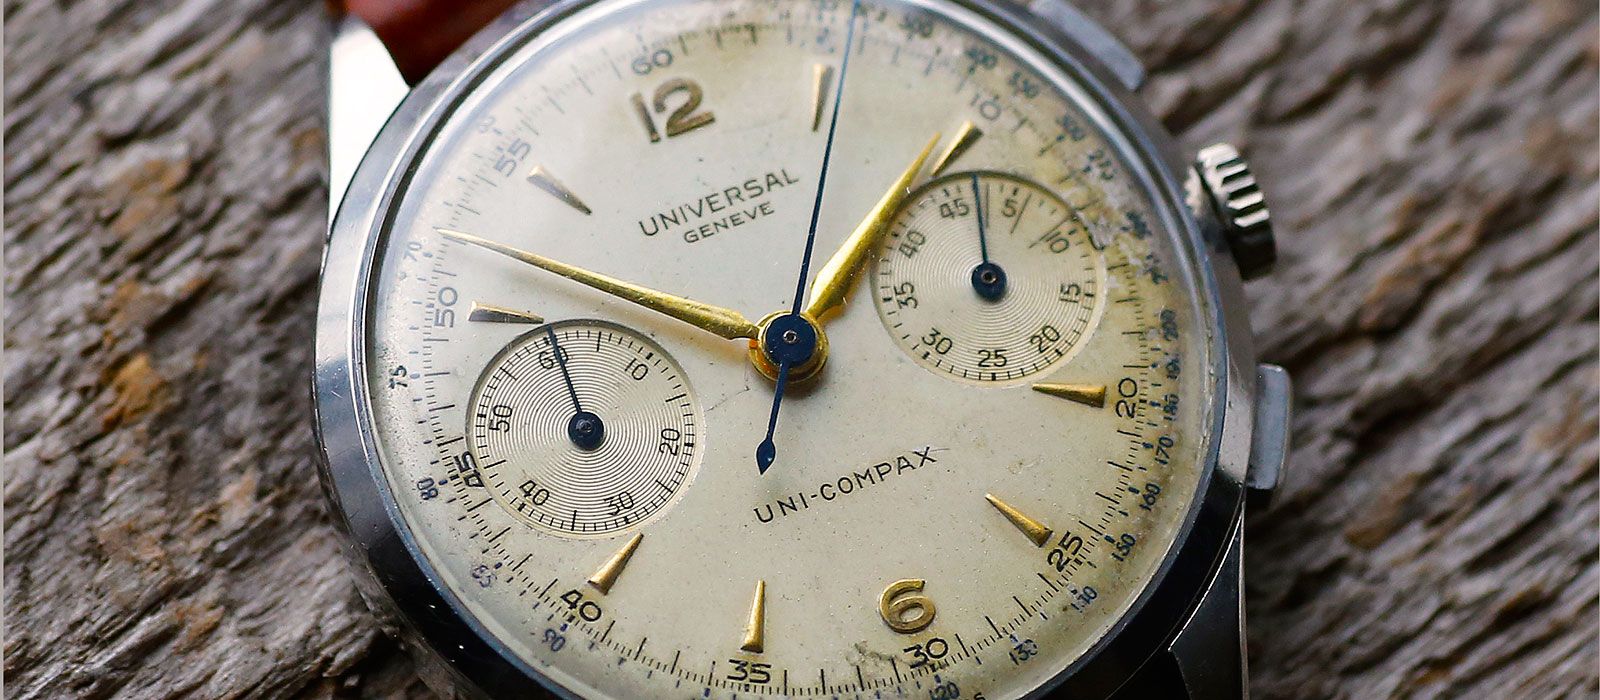 Date Your Universal Geneve Watch By Serial Number - EmmyWatch